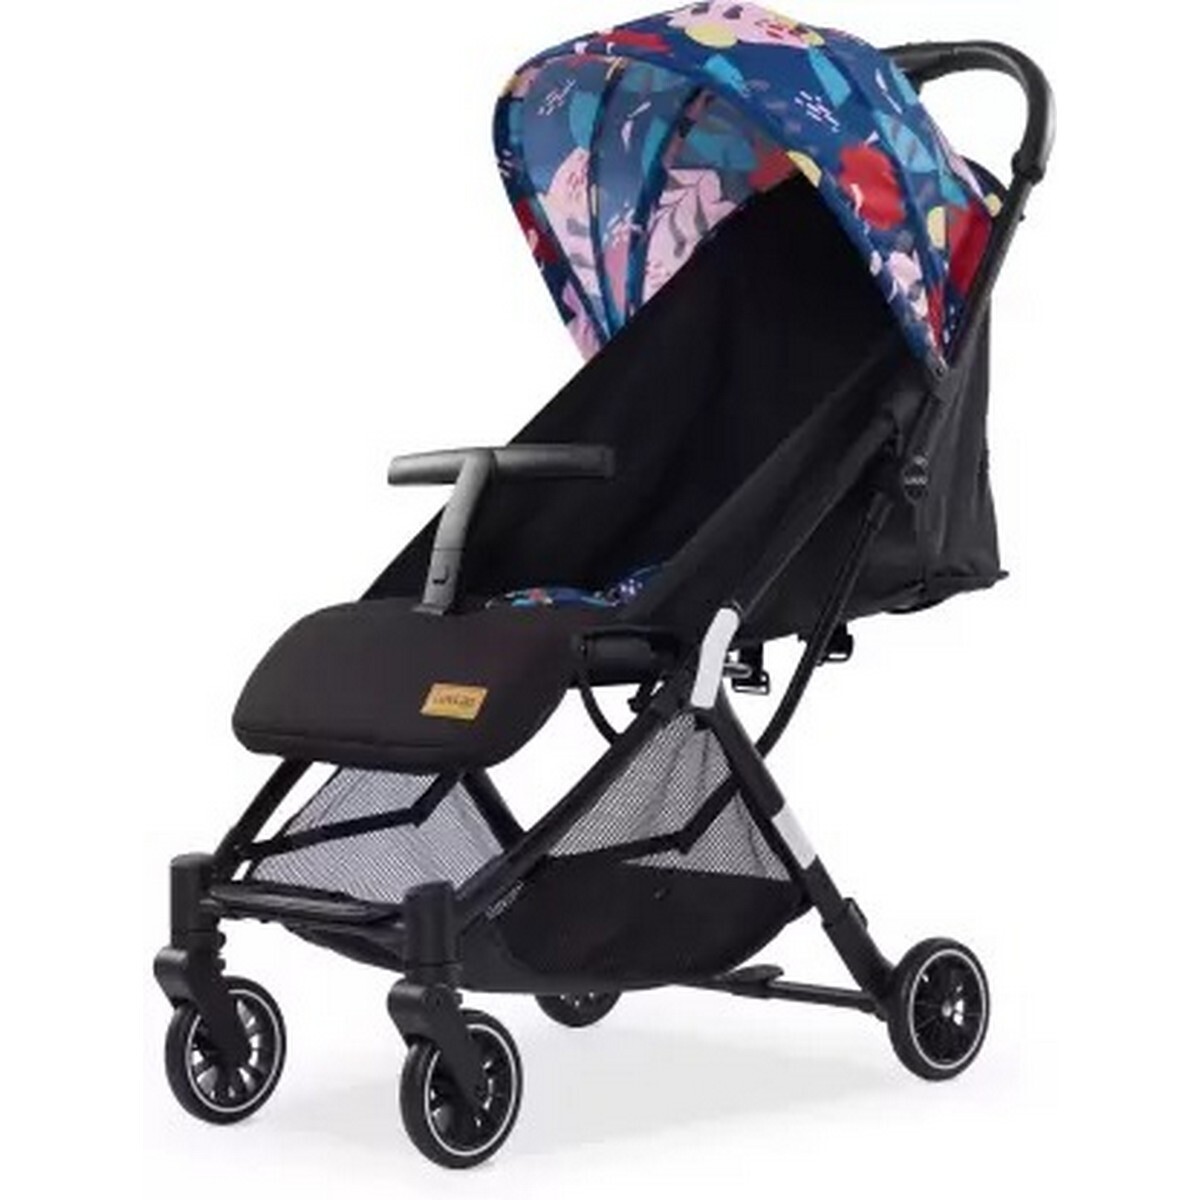 Luvlap Multicolour Baby Stoller